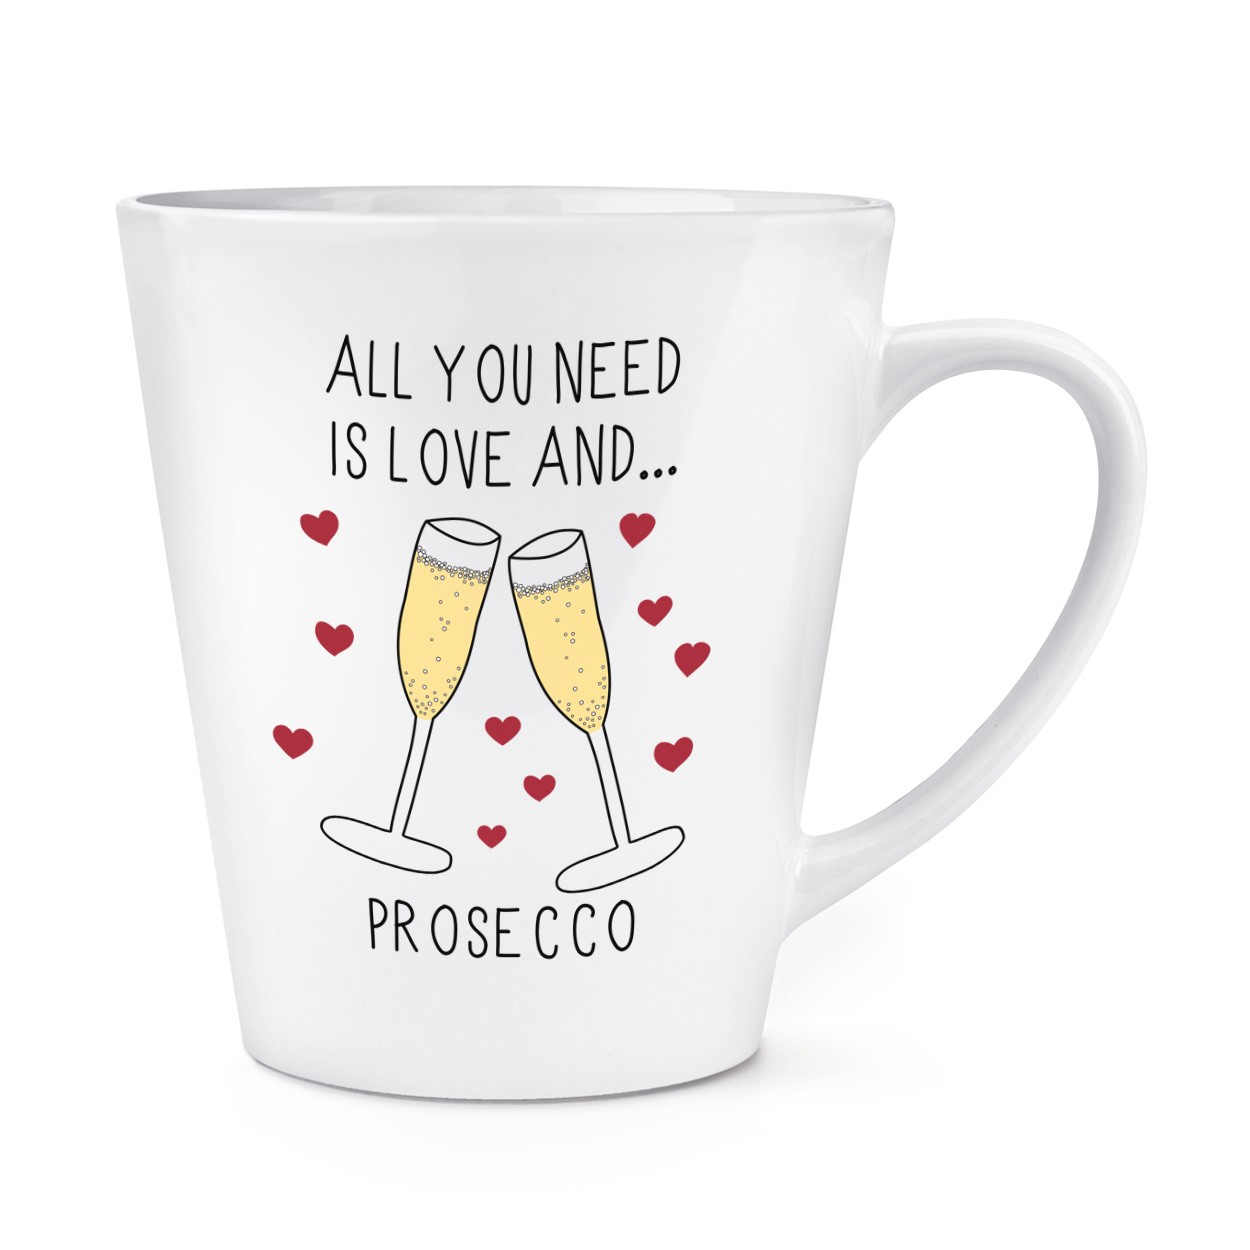 All You Need Is Love And Prosecco 12oz Latte Mug Cup